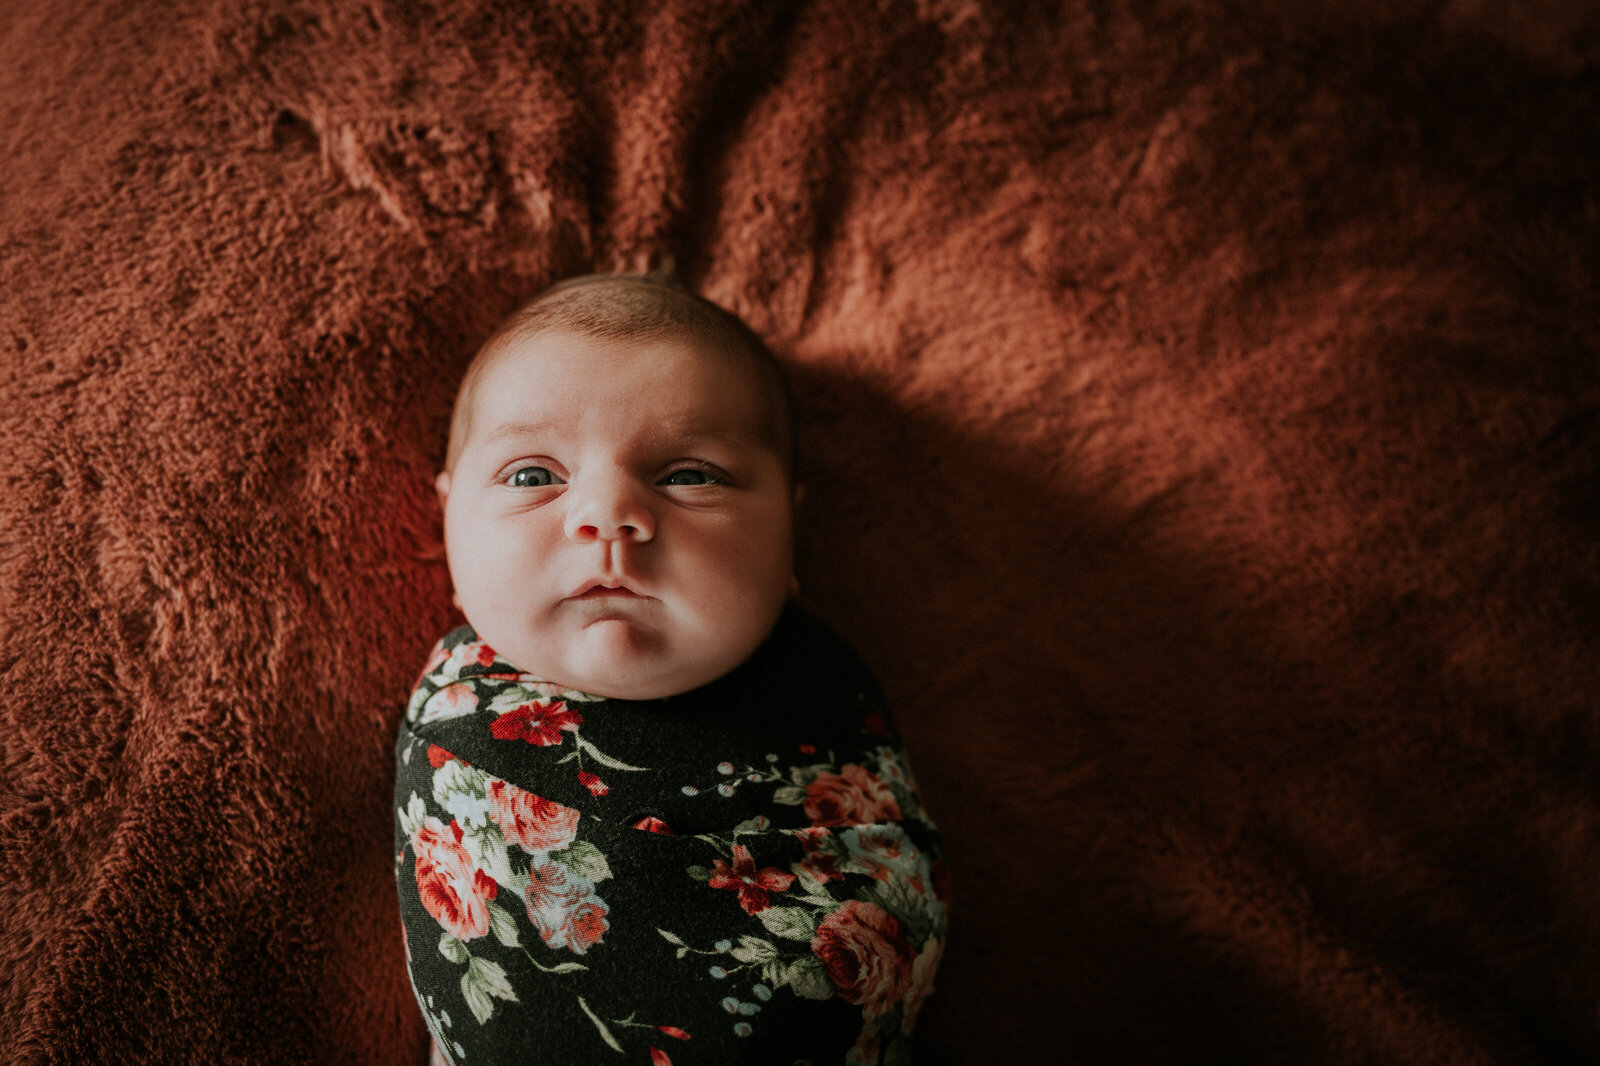 Create magical memories in the Twin Cities. Shannon Kathleen Photography brings newborn bliss to your St. Paul or Minneapolis home. Book a session for timeless moments.